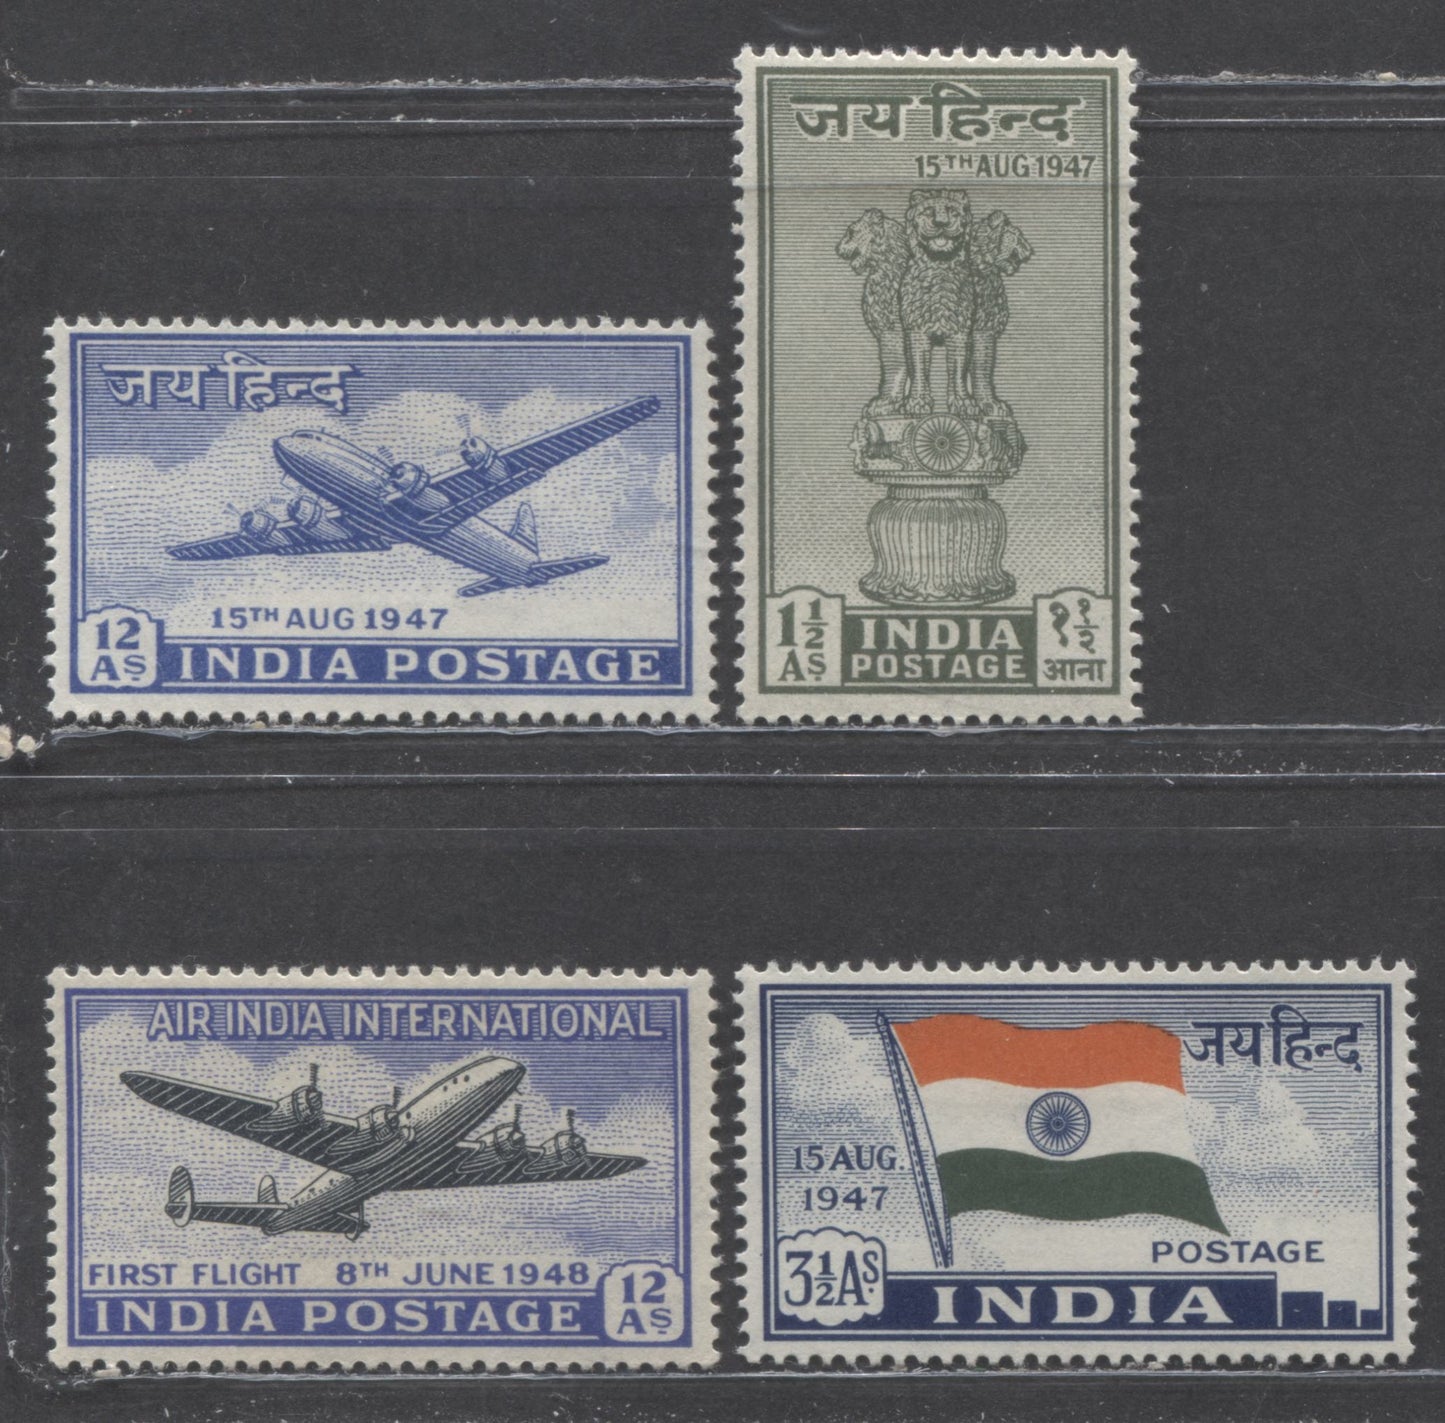 Lot 366 India SC#200/C7 1947-1948 Dominion Status & Airmail Issues, 4 VFOG Singles, Click on Listing to See ALL Pictures, 2022 Scott Classic Cat. $14 USD